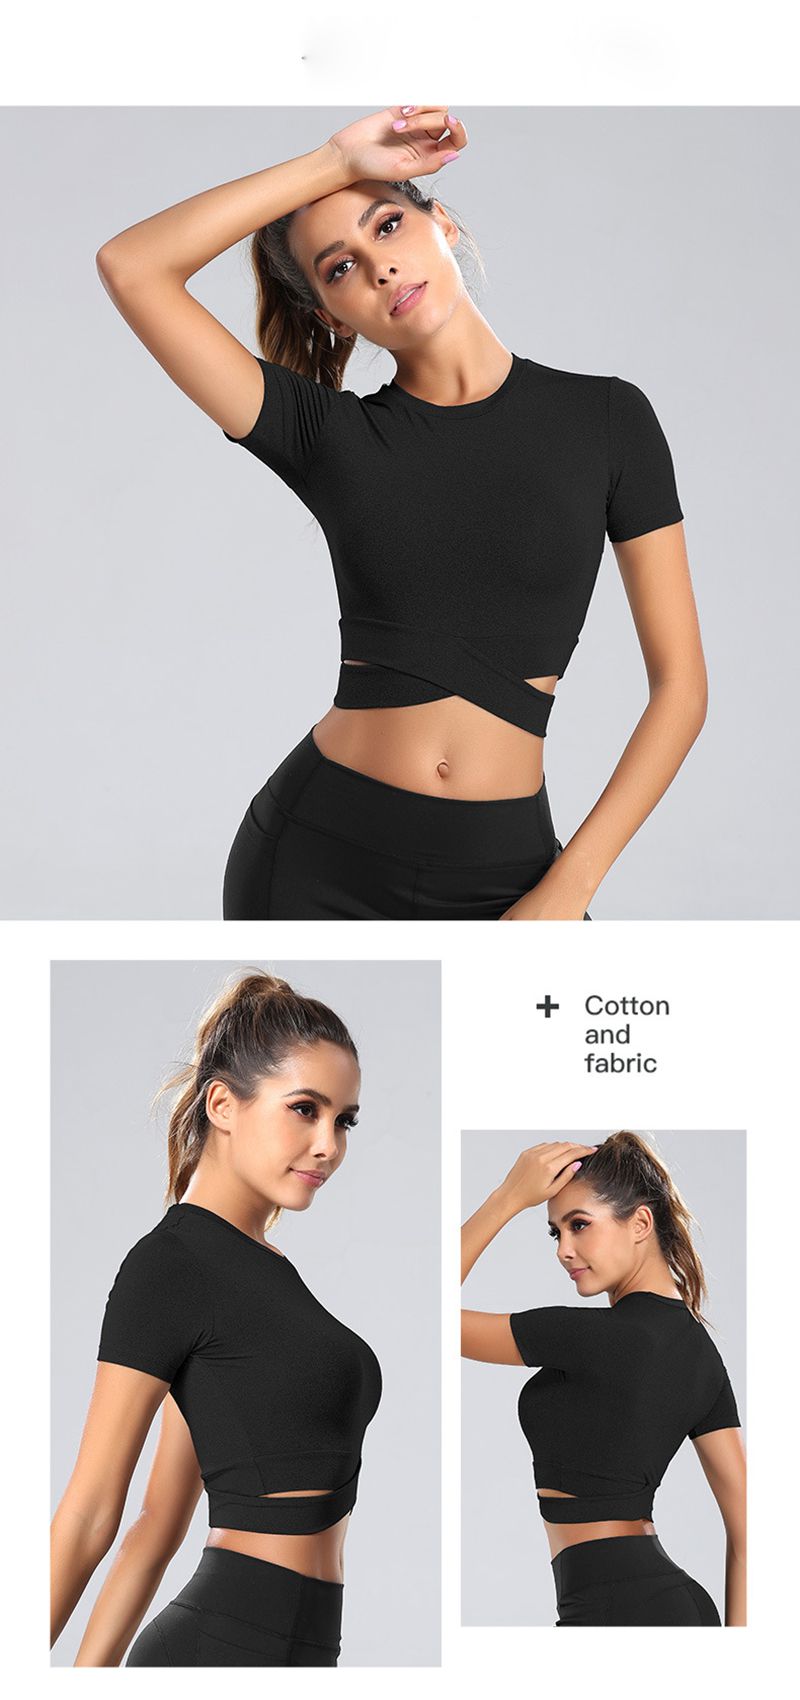 Slim Fit Criss Cross Yoga Short Sleeve Cropped Tee Gym Workout Top